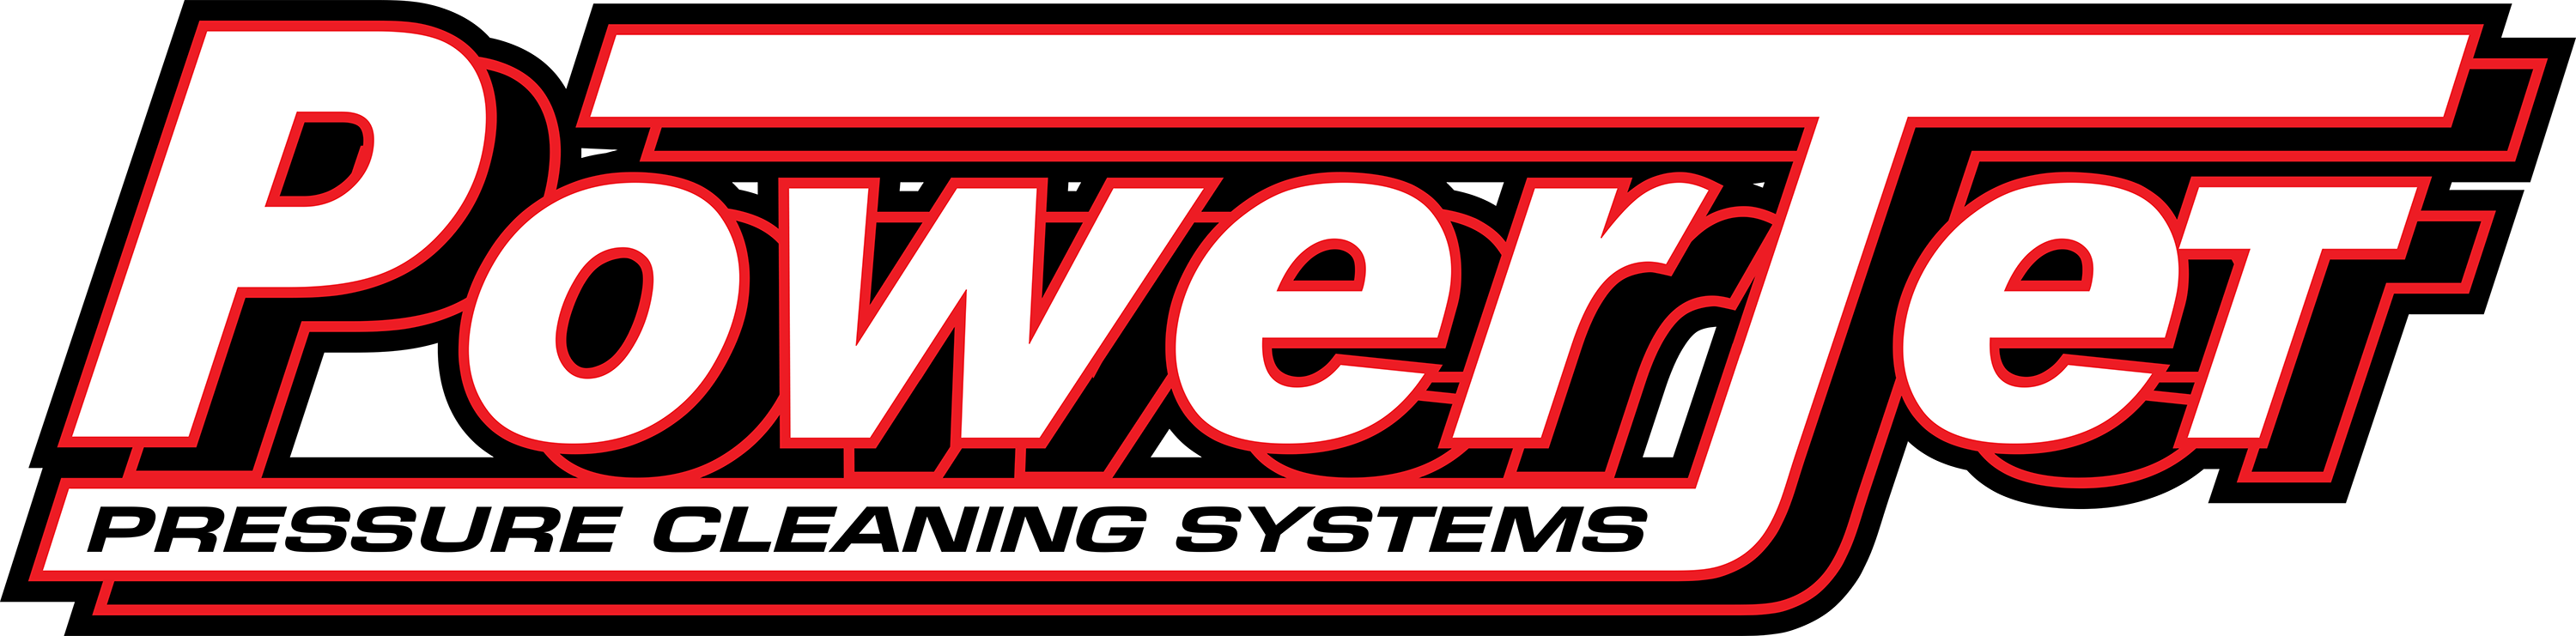 Powerjet Pressure Cleaning Systems